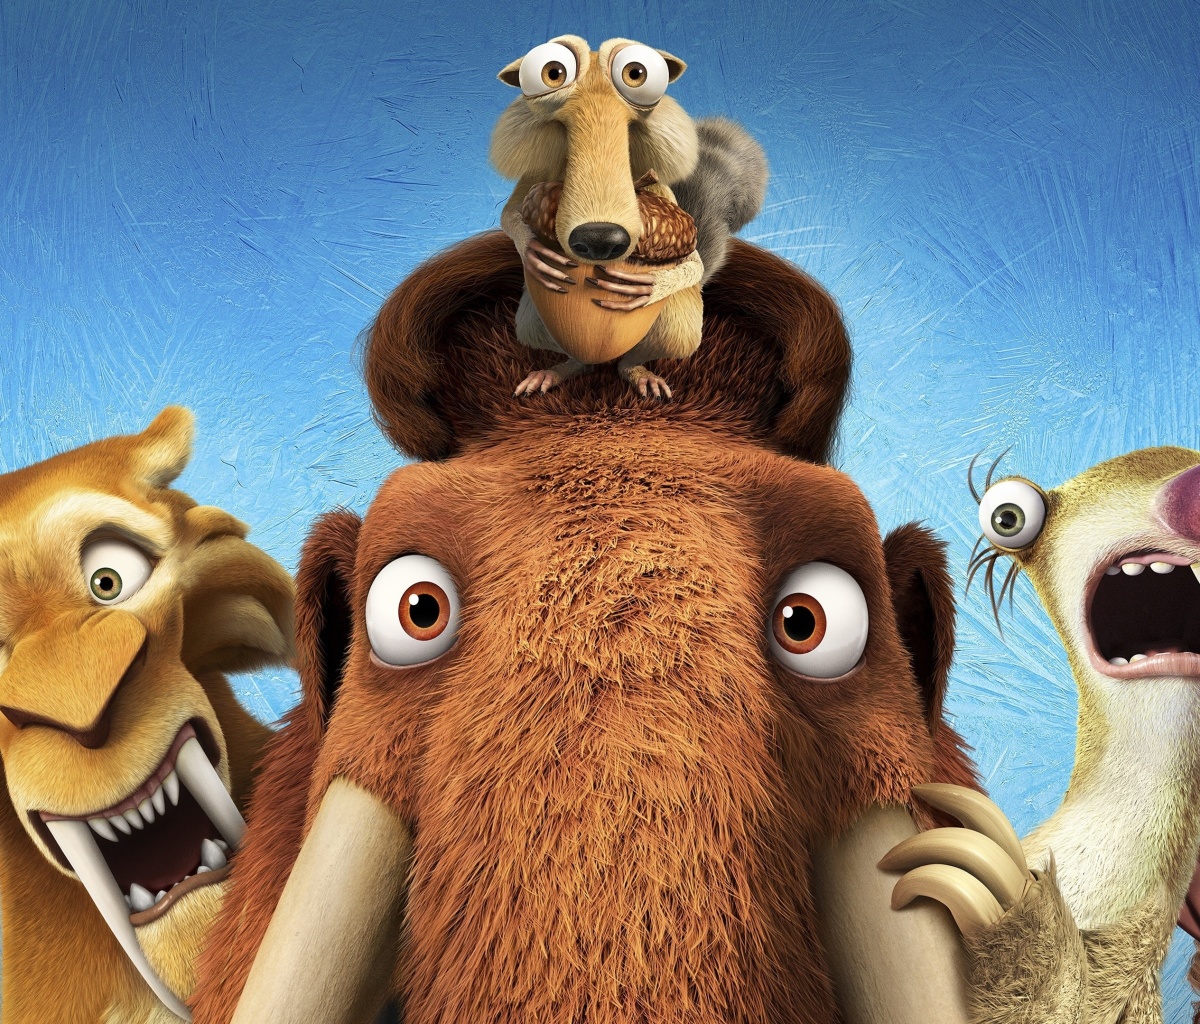 Ice Age 5 Collision Course with Diego, Manny, Scrat, Sid, Mammoths screenshot #1 1200x1024